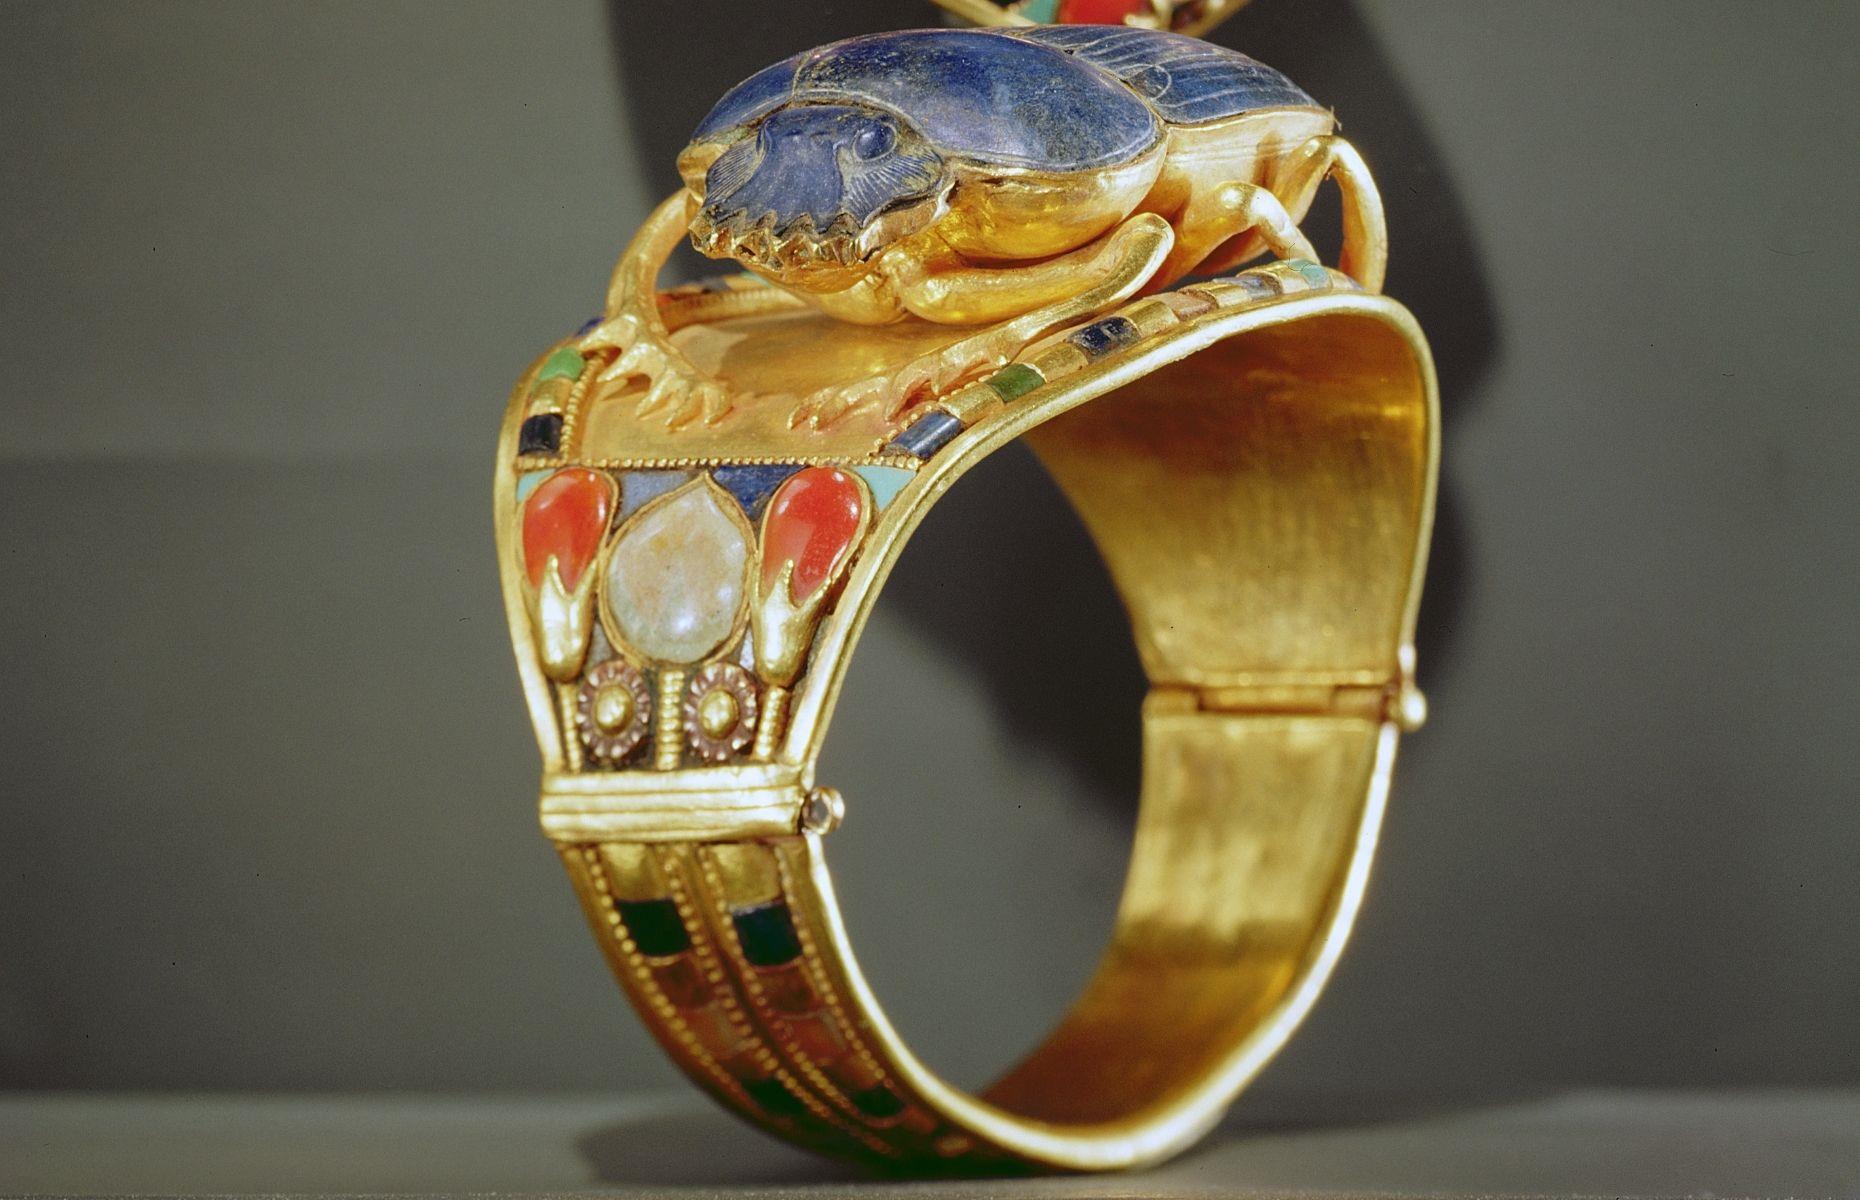 <p>Ornate jewellery was commonly stored inside Egyptian pyramids, either as divine offerings or to accompany the deceased into the afterlife. This spectacular scarab bracelet is just one of the items found inside Tutankhamun's tomb. Formed from gold and lapis lazuli, the intricate trinket is a gorgeous example of ancient craftsmanship. Regardless of <a href="https://www.gemrockauctions.com/learn/did-you-know/ancient-egyptian-jewellery#:~:text=The%20ornaments%20included%20heart%20scarabs,,%20animal%20teeth,%20and%20shells.">gender or status</a>, the Egyptians loved jewellery, and over the centuries endless precious charms and ornaments have been discovered. </p>